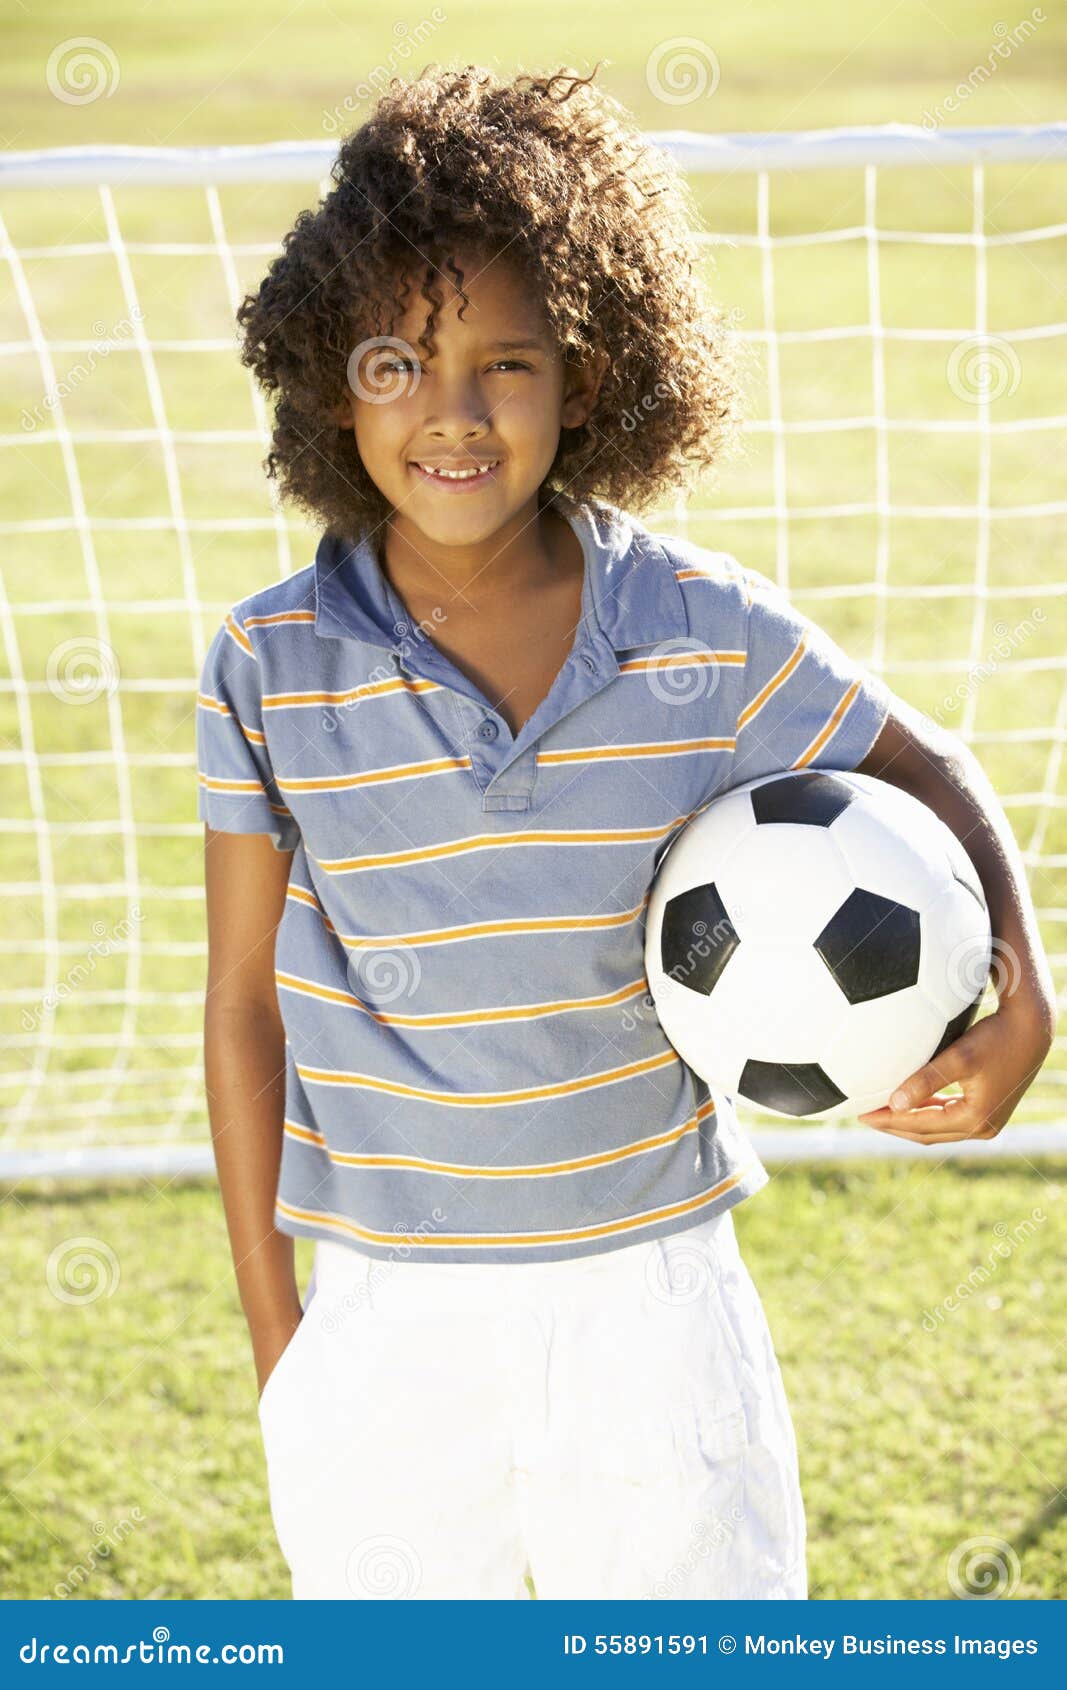 Young Boy with Soccer Ball Standing by Goal Stock Image - Image of ...